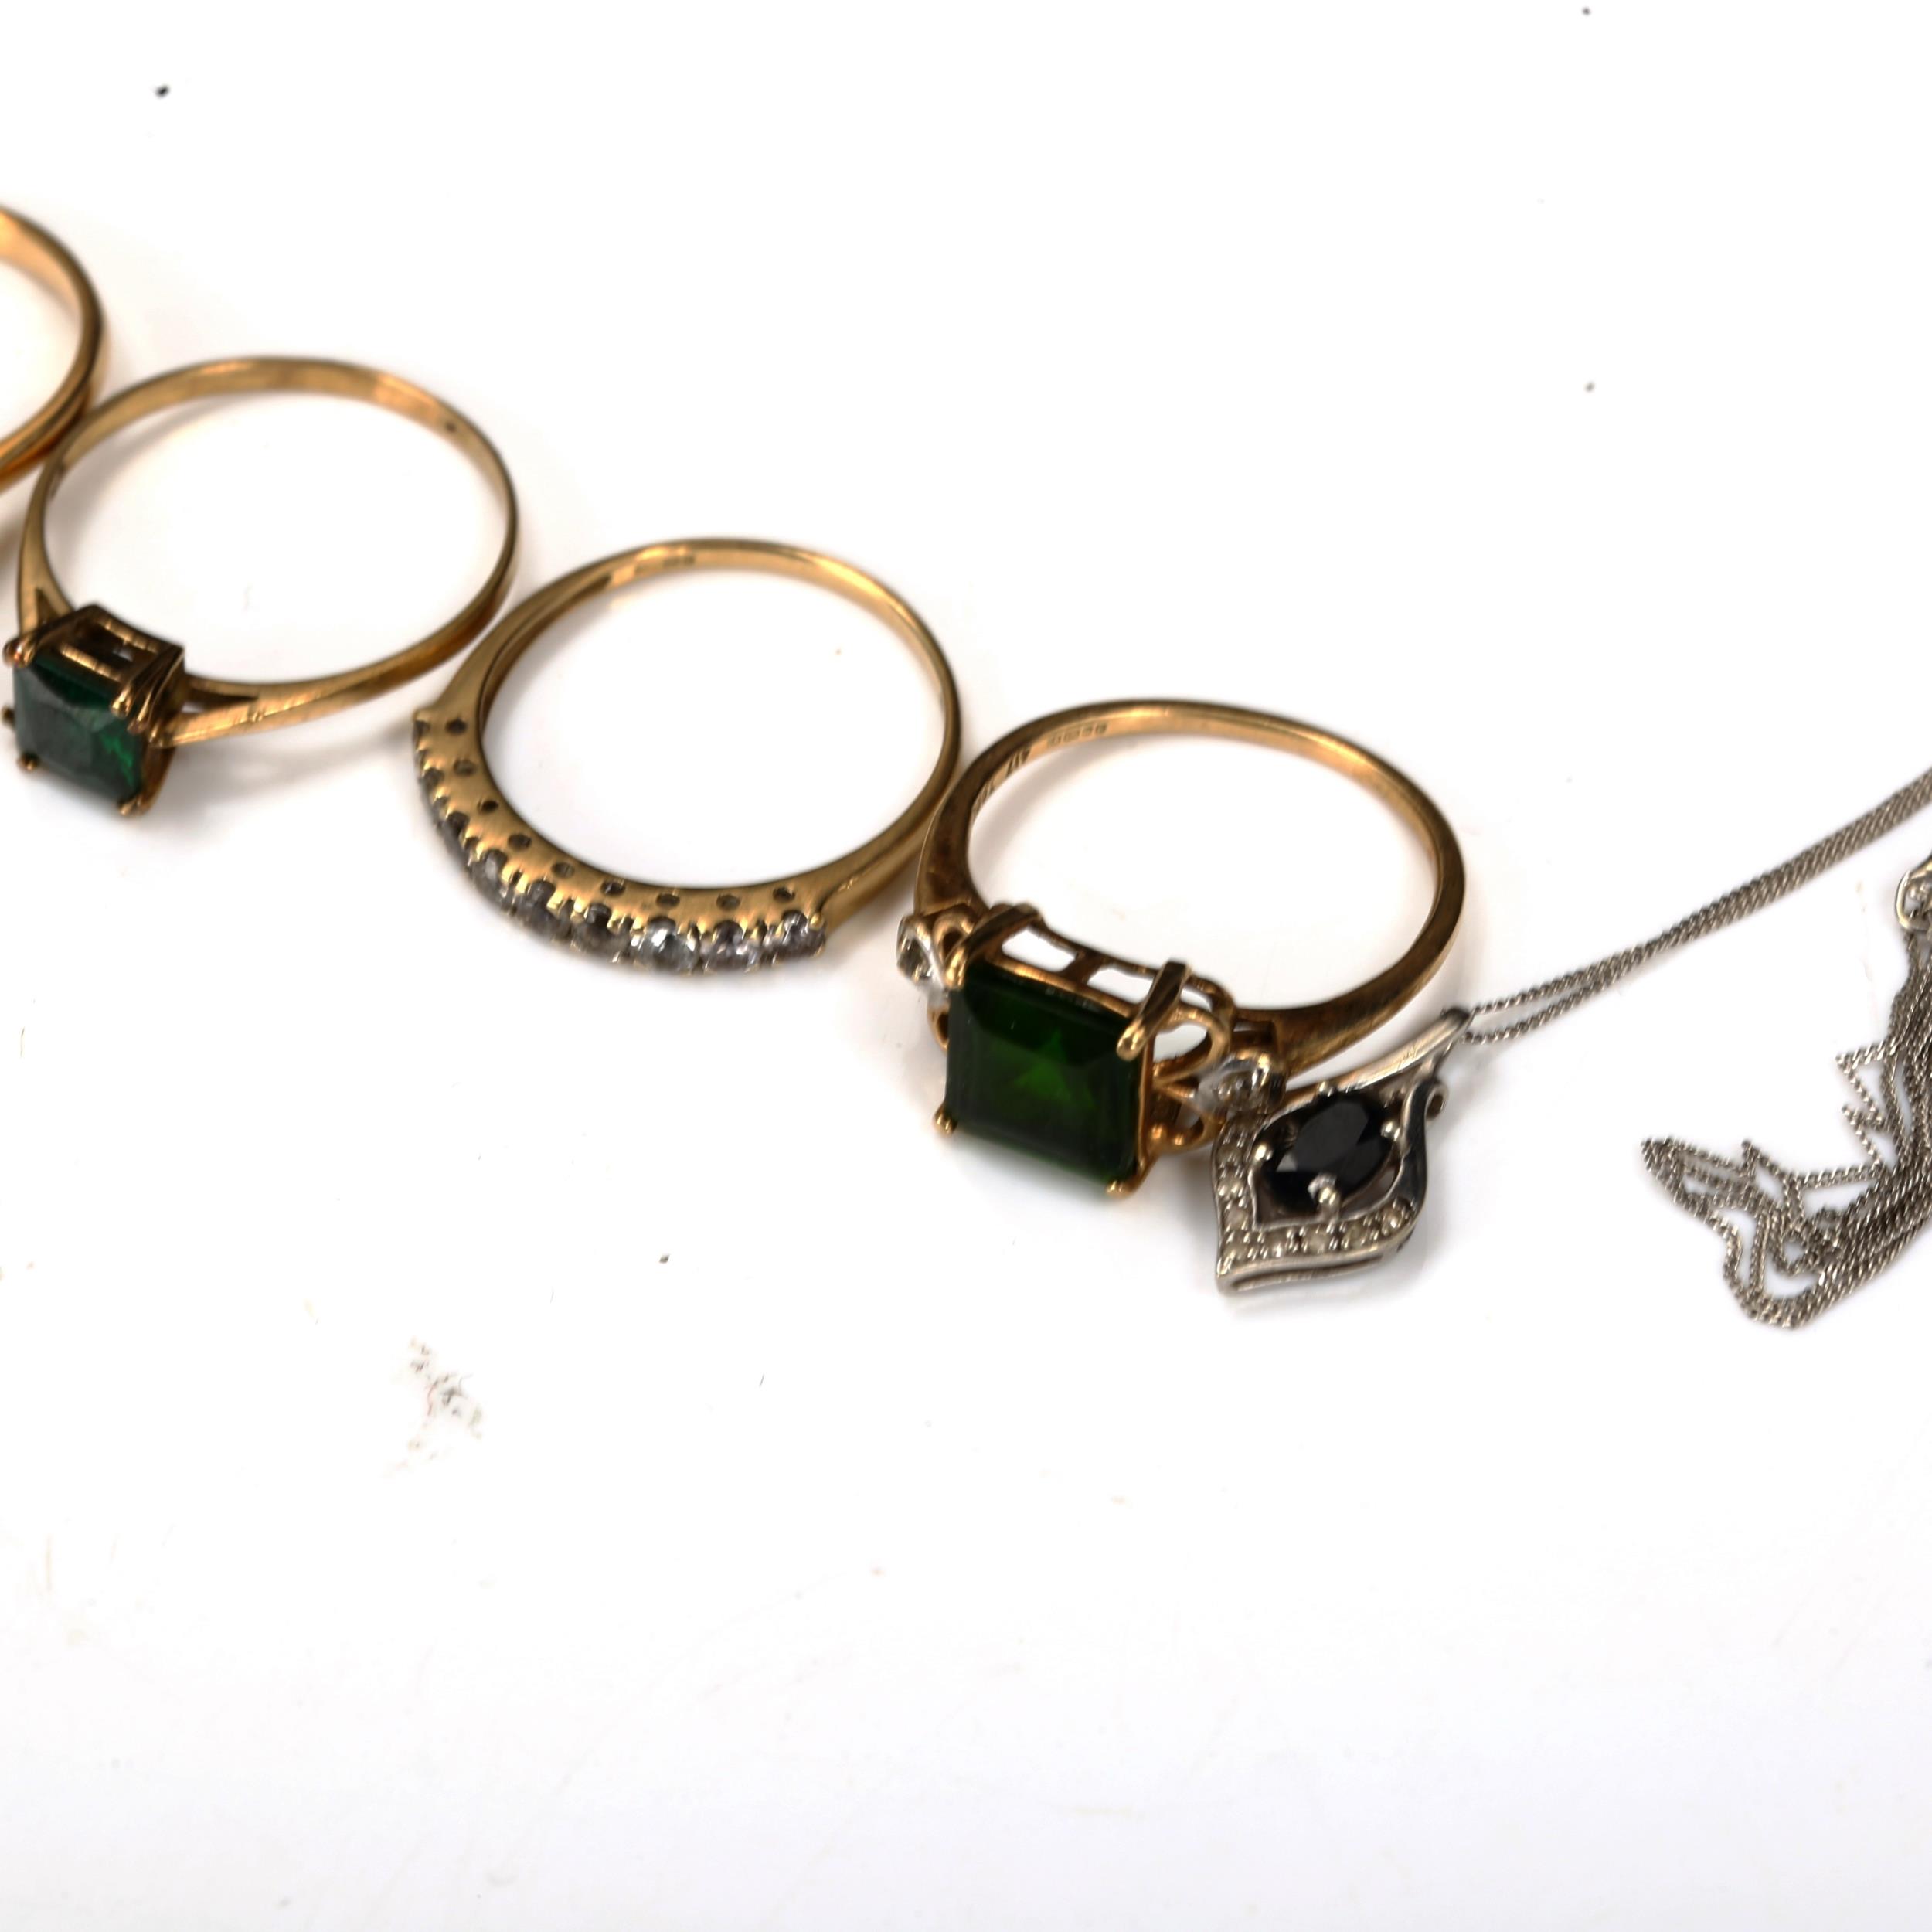 Various 9ct gold jewellery, comprising 4 rings, a pair of earrings, and pendant necklace, 11.2g - Image 3 of 4